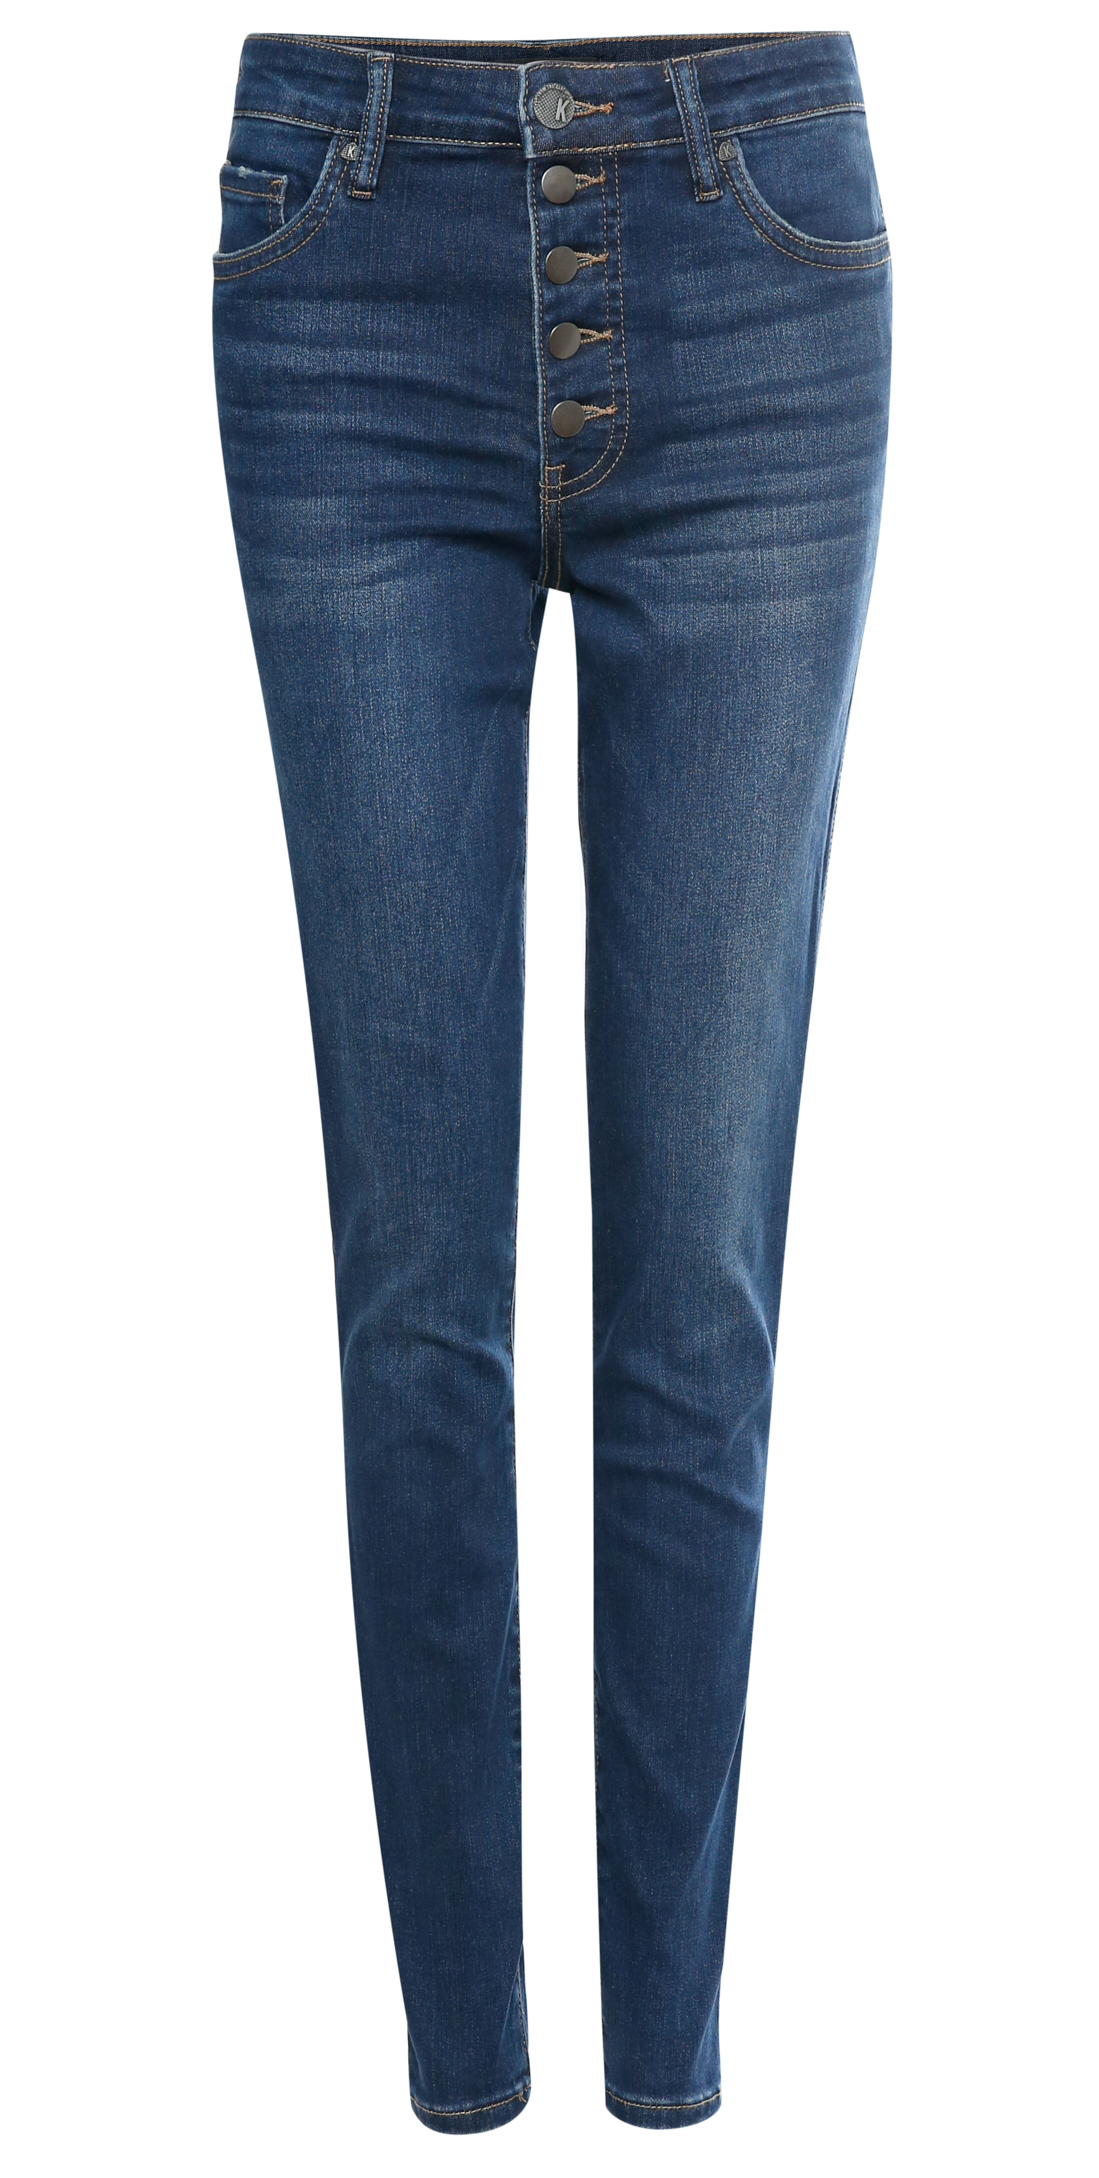 Kut from the Kloth High Rise Fab Ab Denim